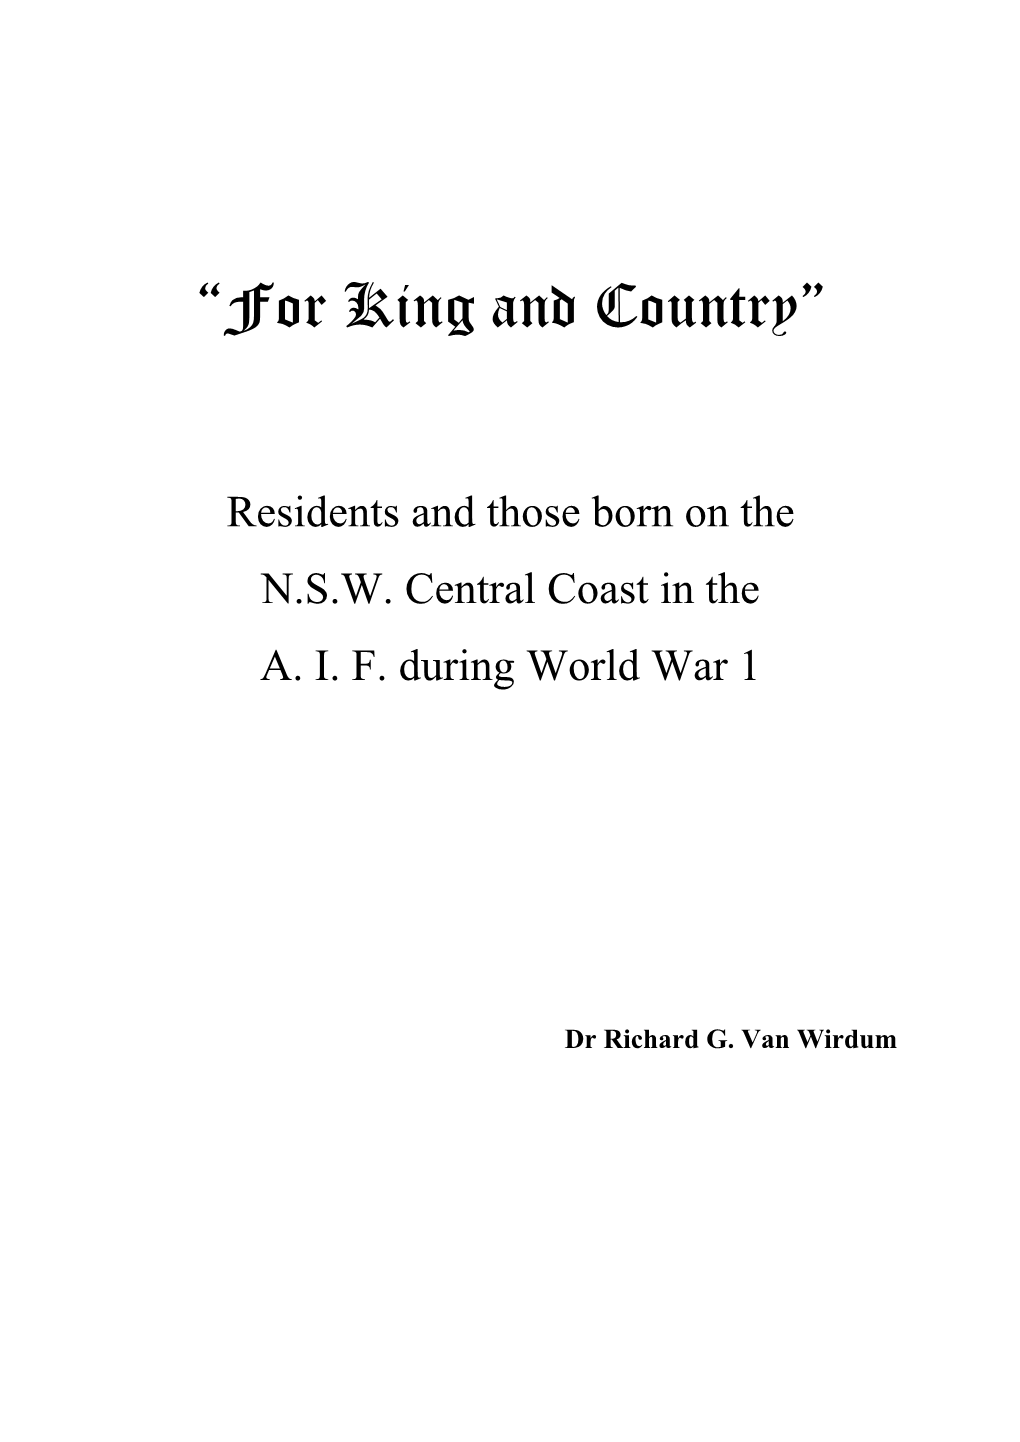 “For King and Country”